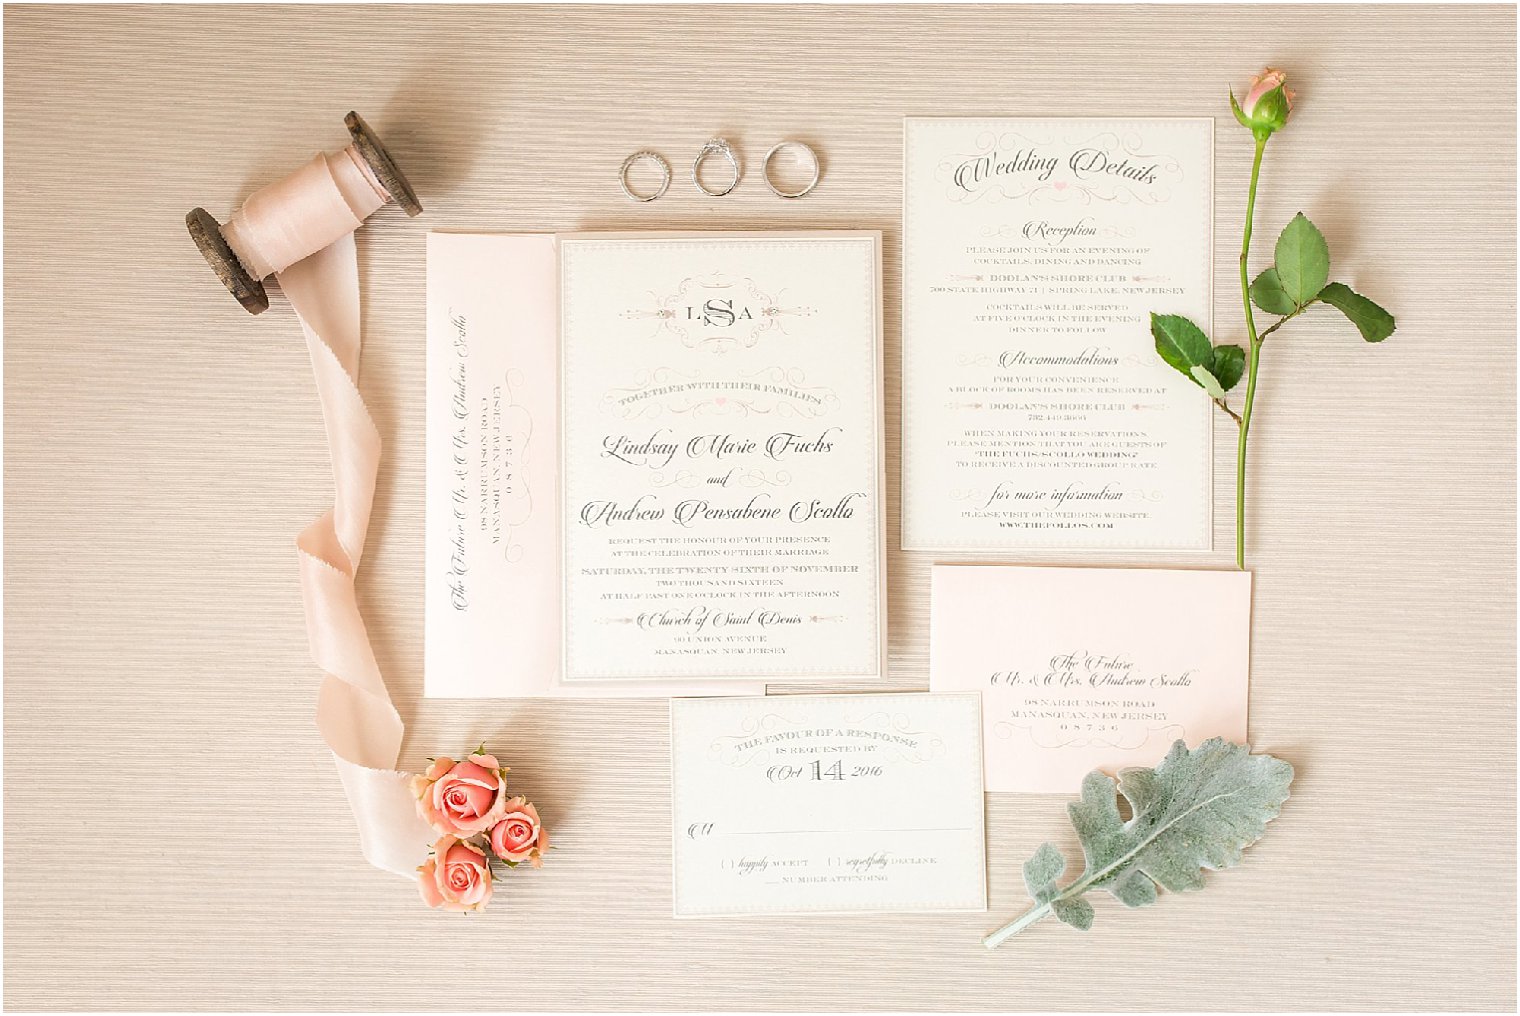 Invitations by Holland Designs | Photo by Idalia Photography